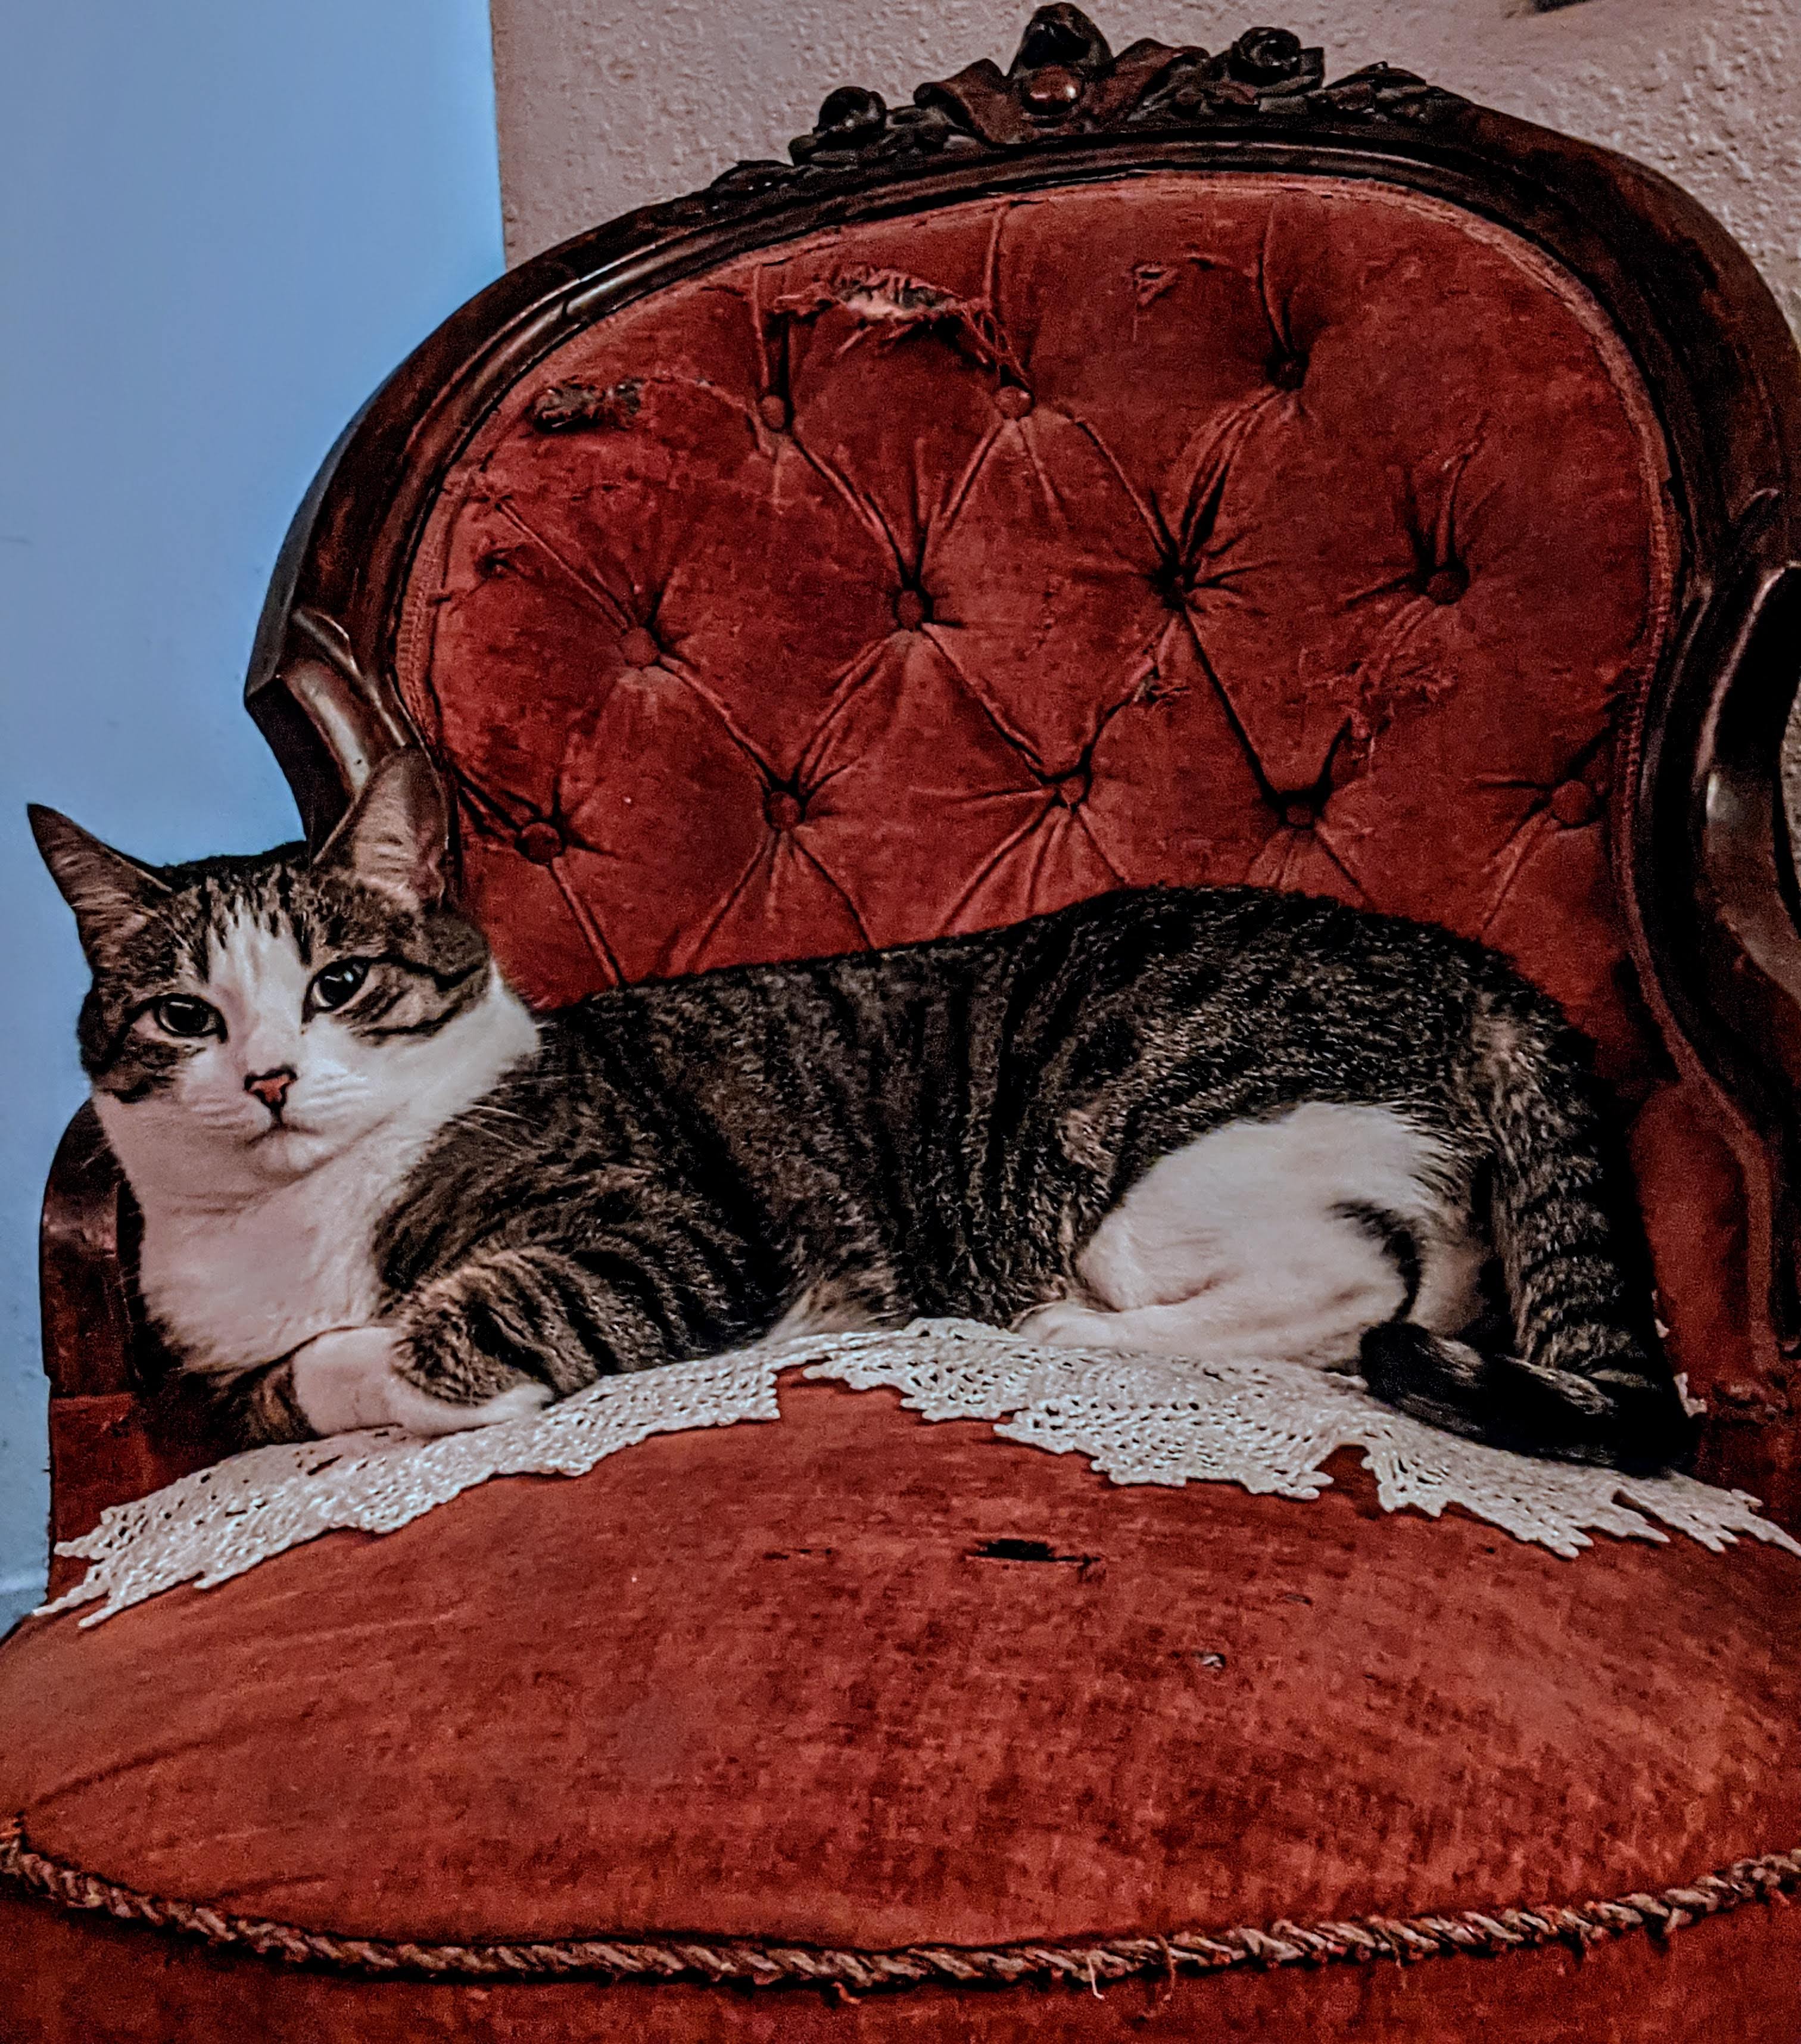 Photo of Maple looking regal in an antique chair.